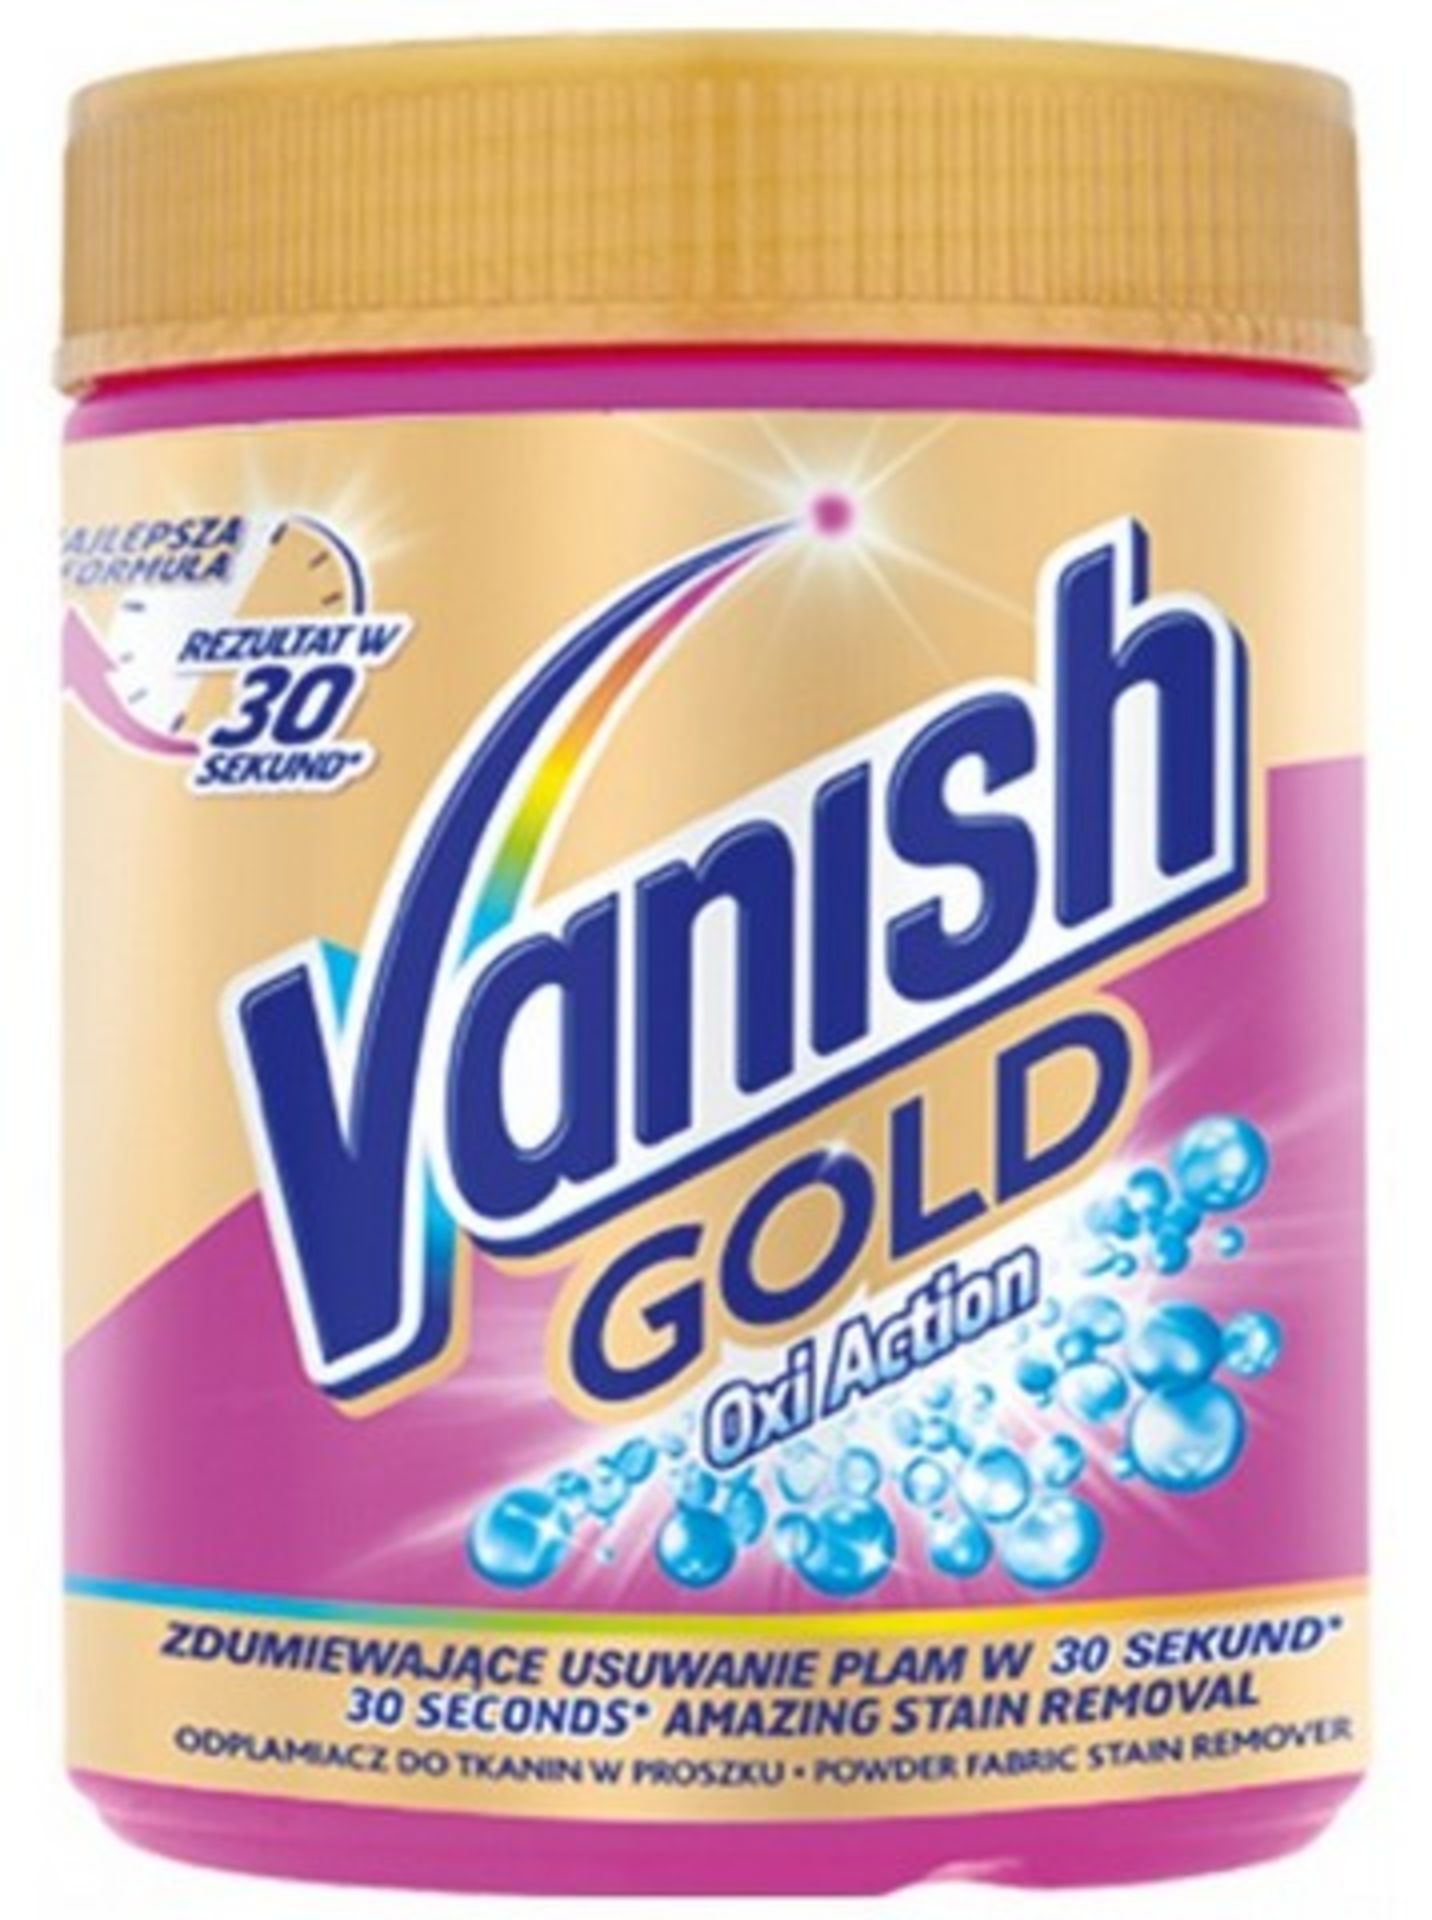 V Brand New Vanish Gold Oxi Action With Amazing Results In 30 Seconds 470 geBay Price £11.05